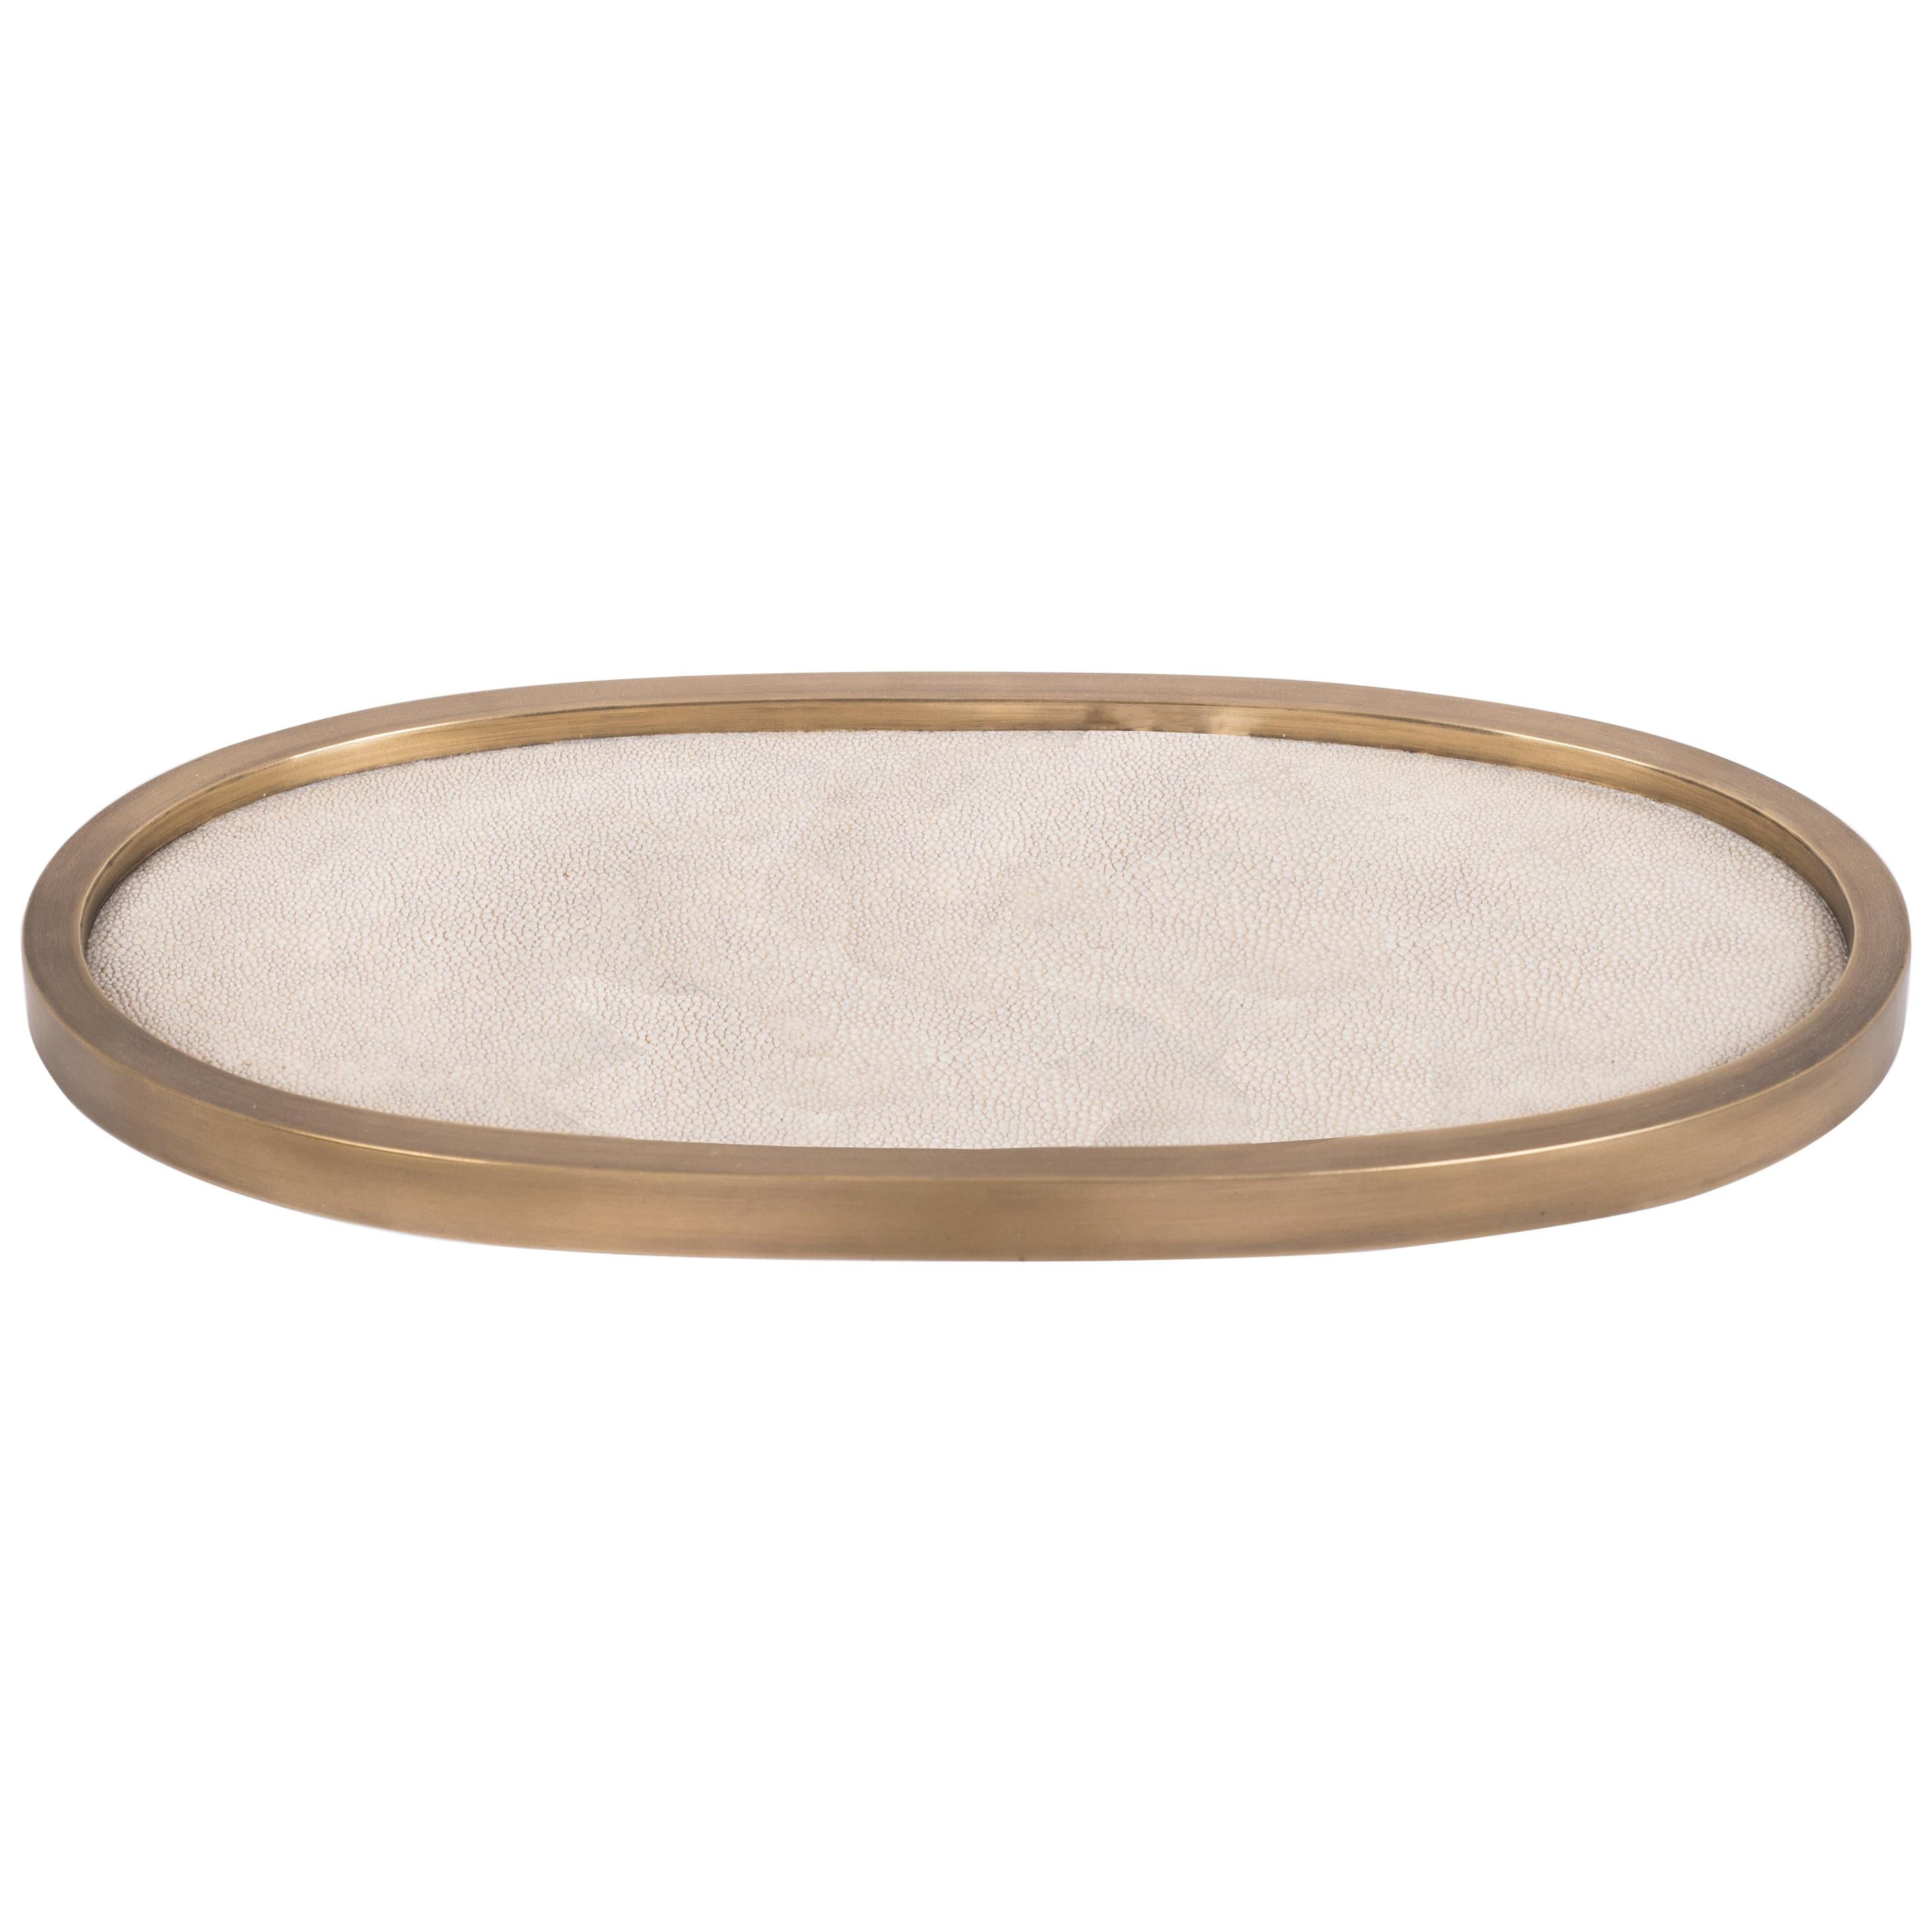 Oval Tray in Cream Shagreen and Brass by Kifu, Paris